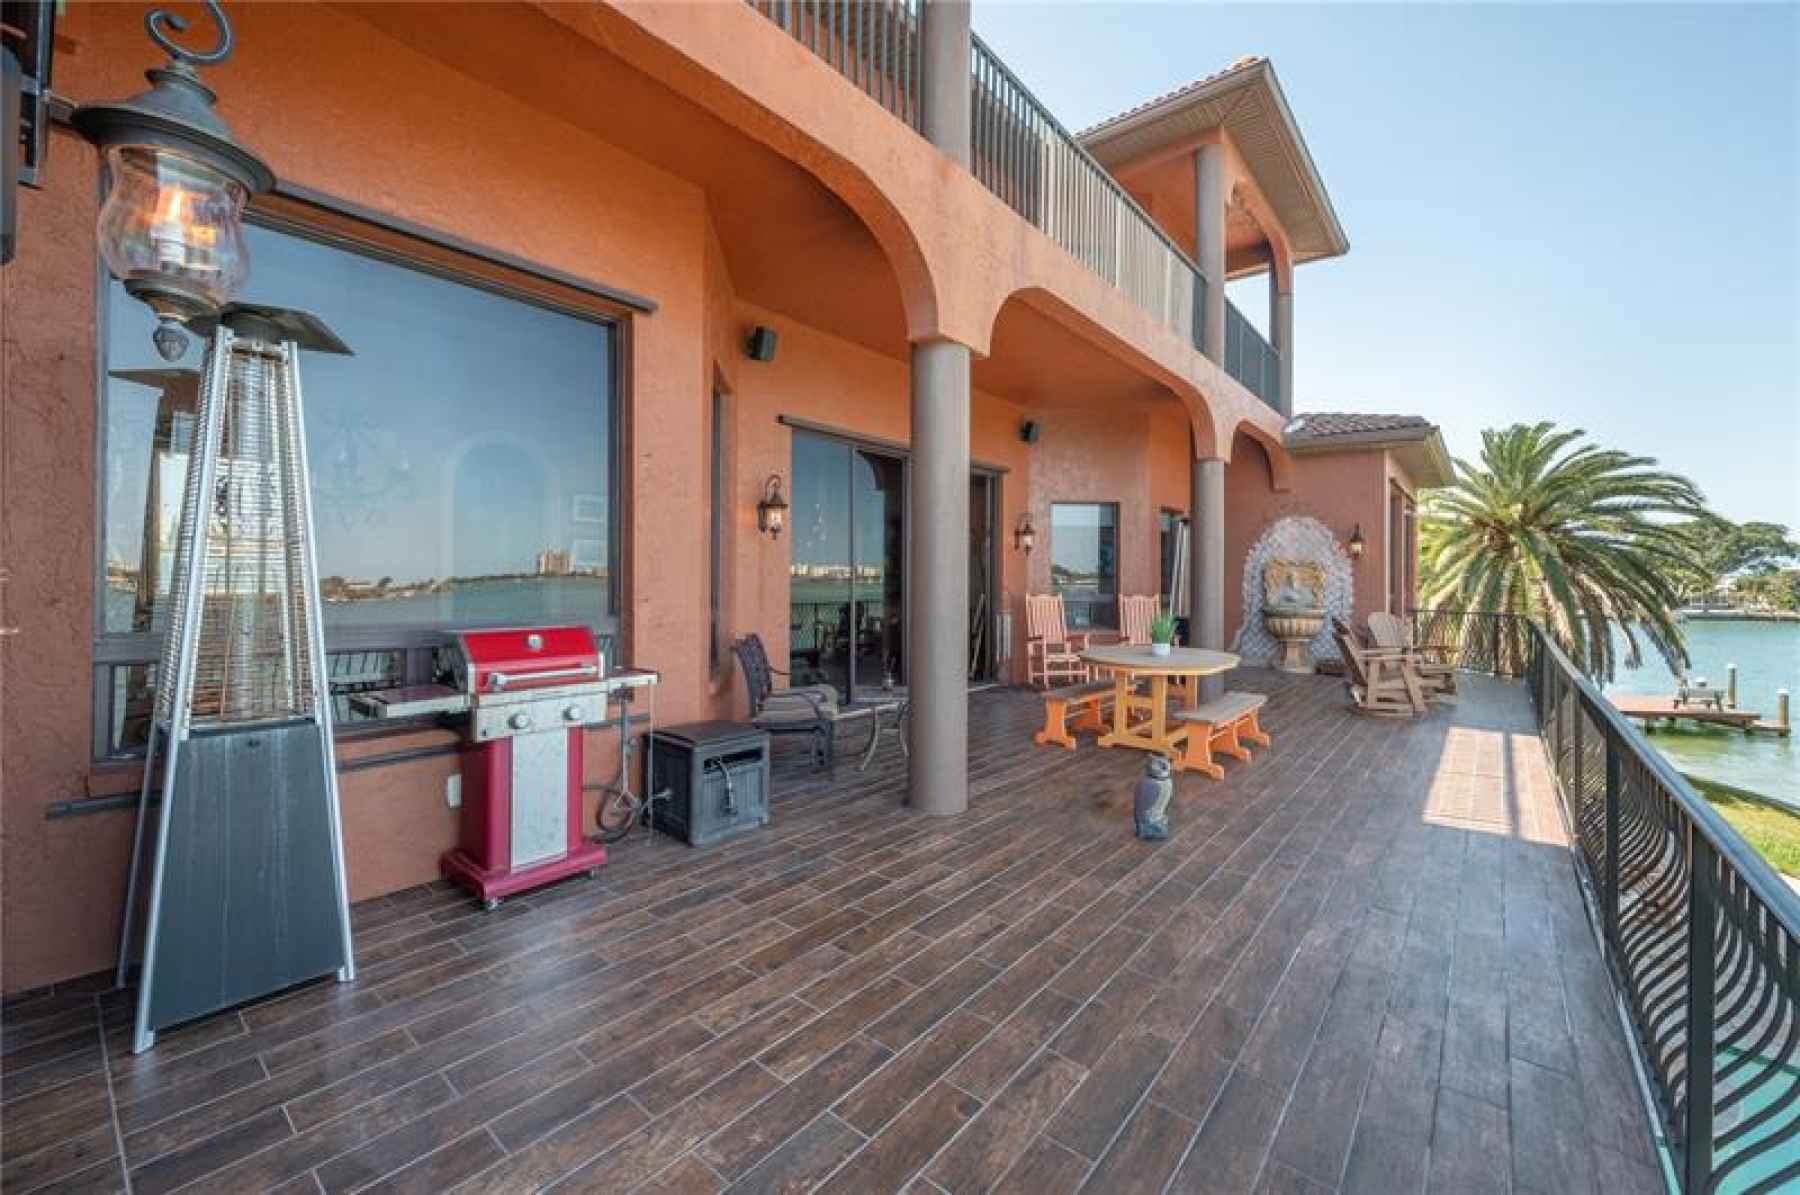 Spacious Area on Balcony - Perfect For Entertaining!